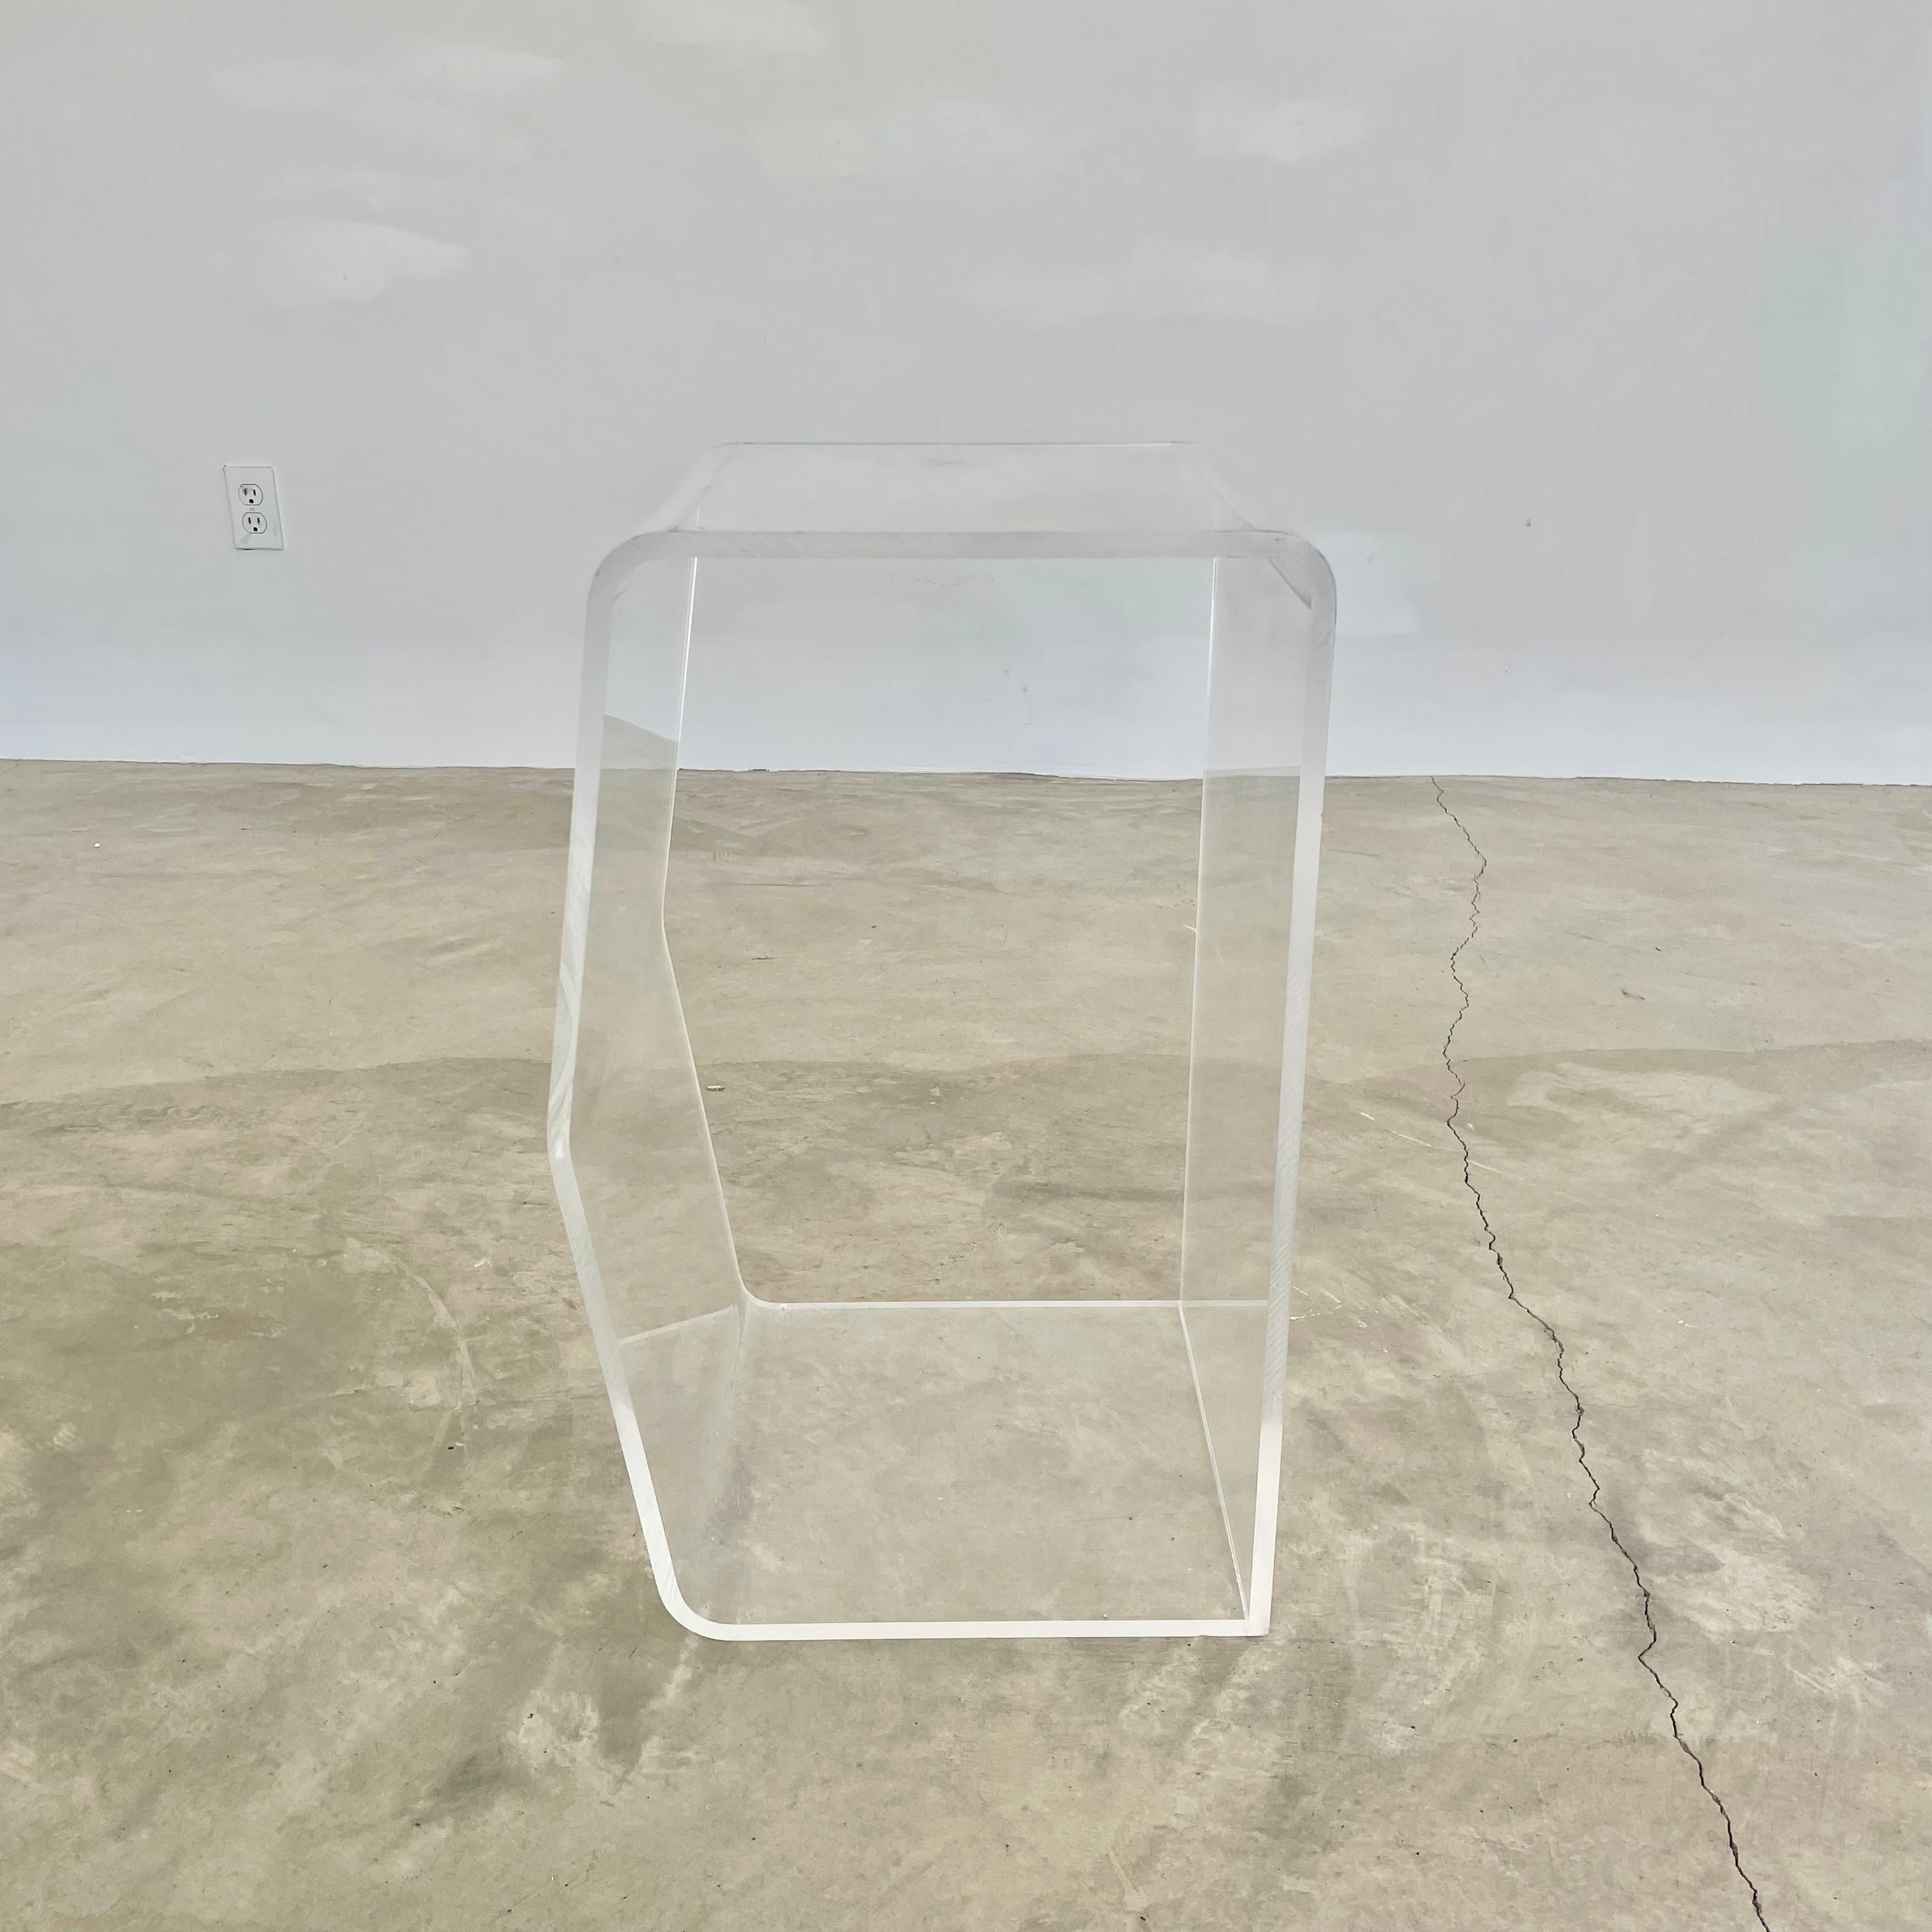 Rectangular shaped lucite side table with one wall protruding out into a gable. Made circa 1980. A gorgeous, subtle and modern accent piece that would work seamlessly in any room as side table, drink table or even as a nightstand. Good condition to